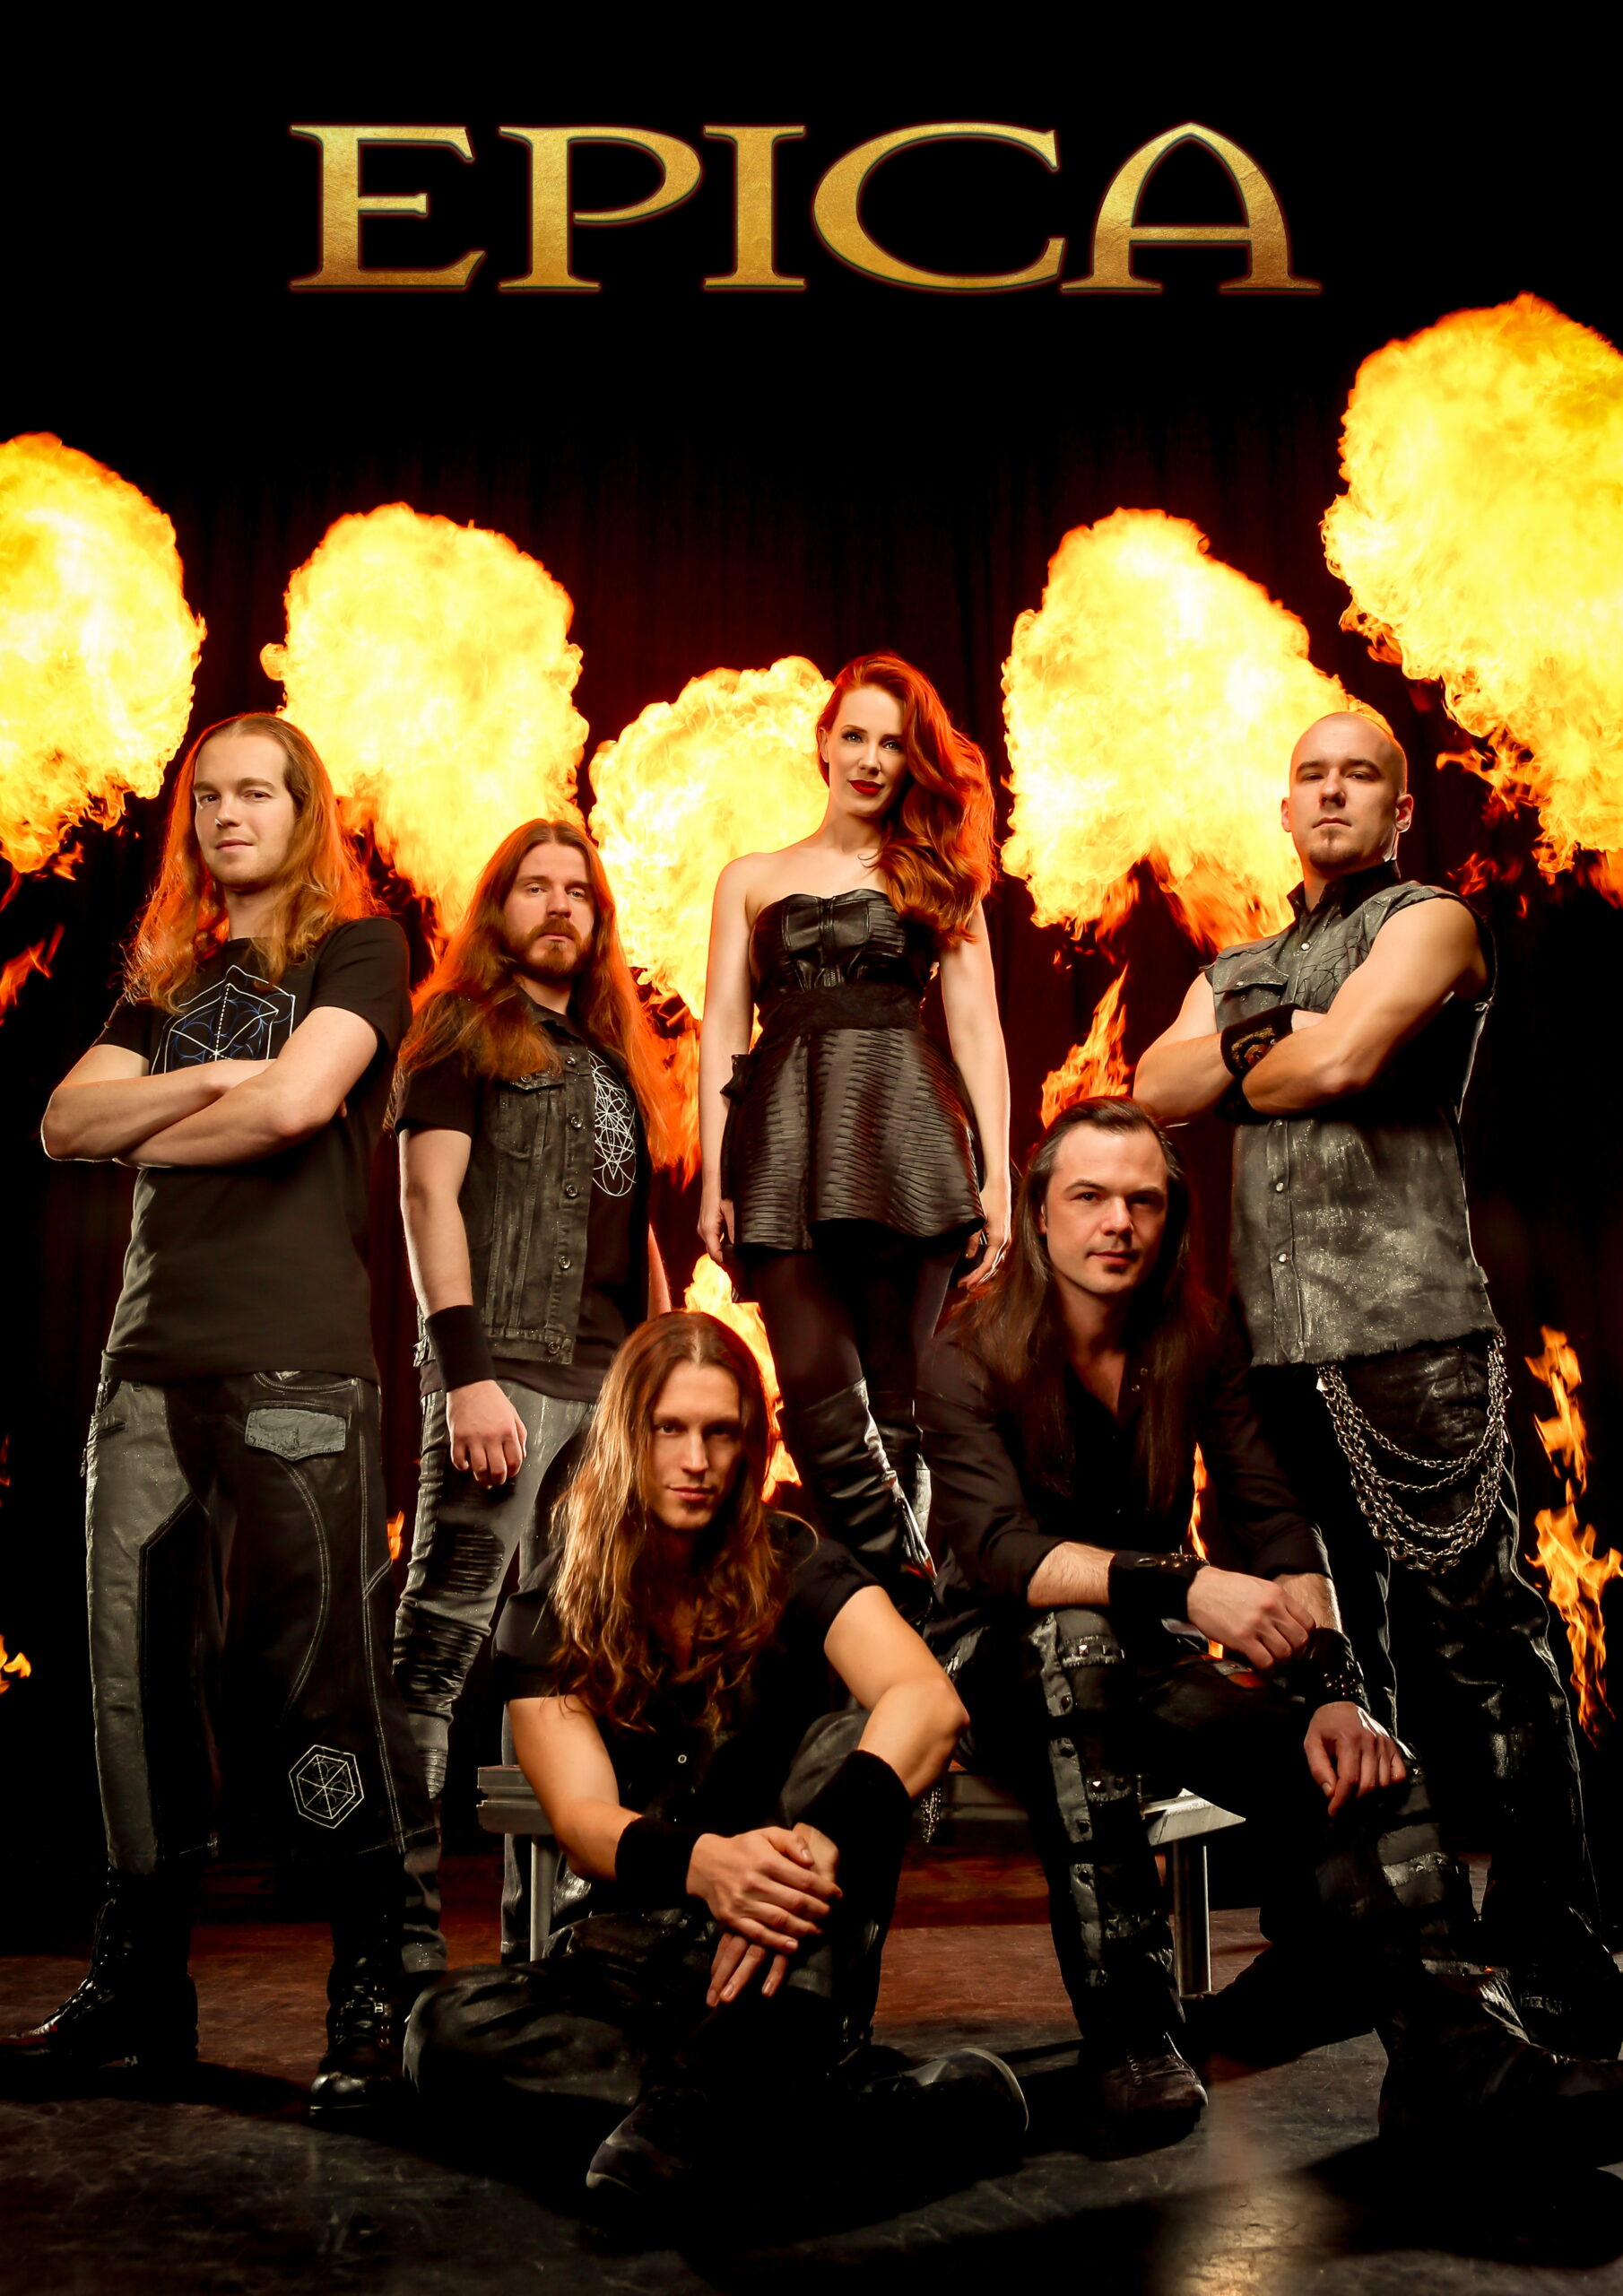 Epica is a rock band from the Netherlands